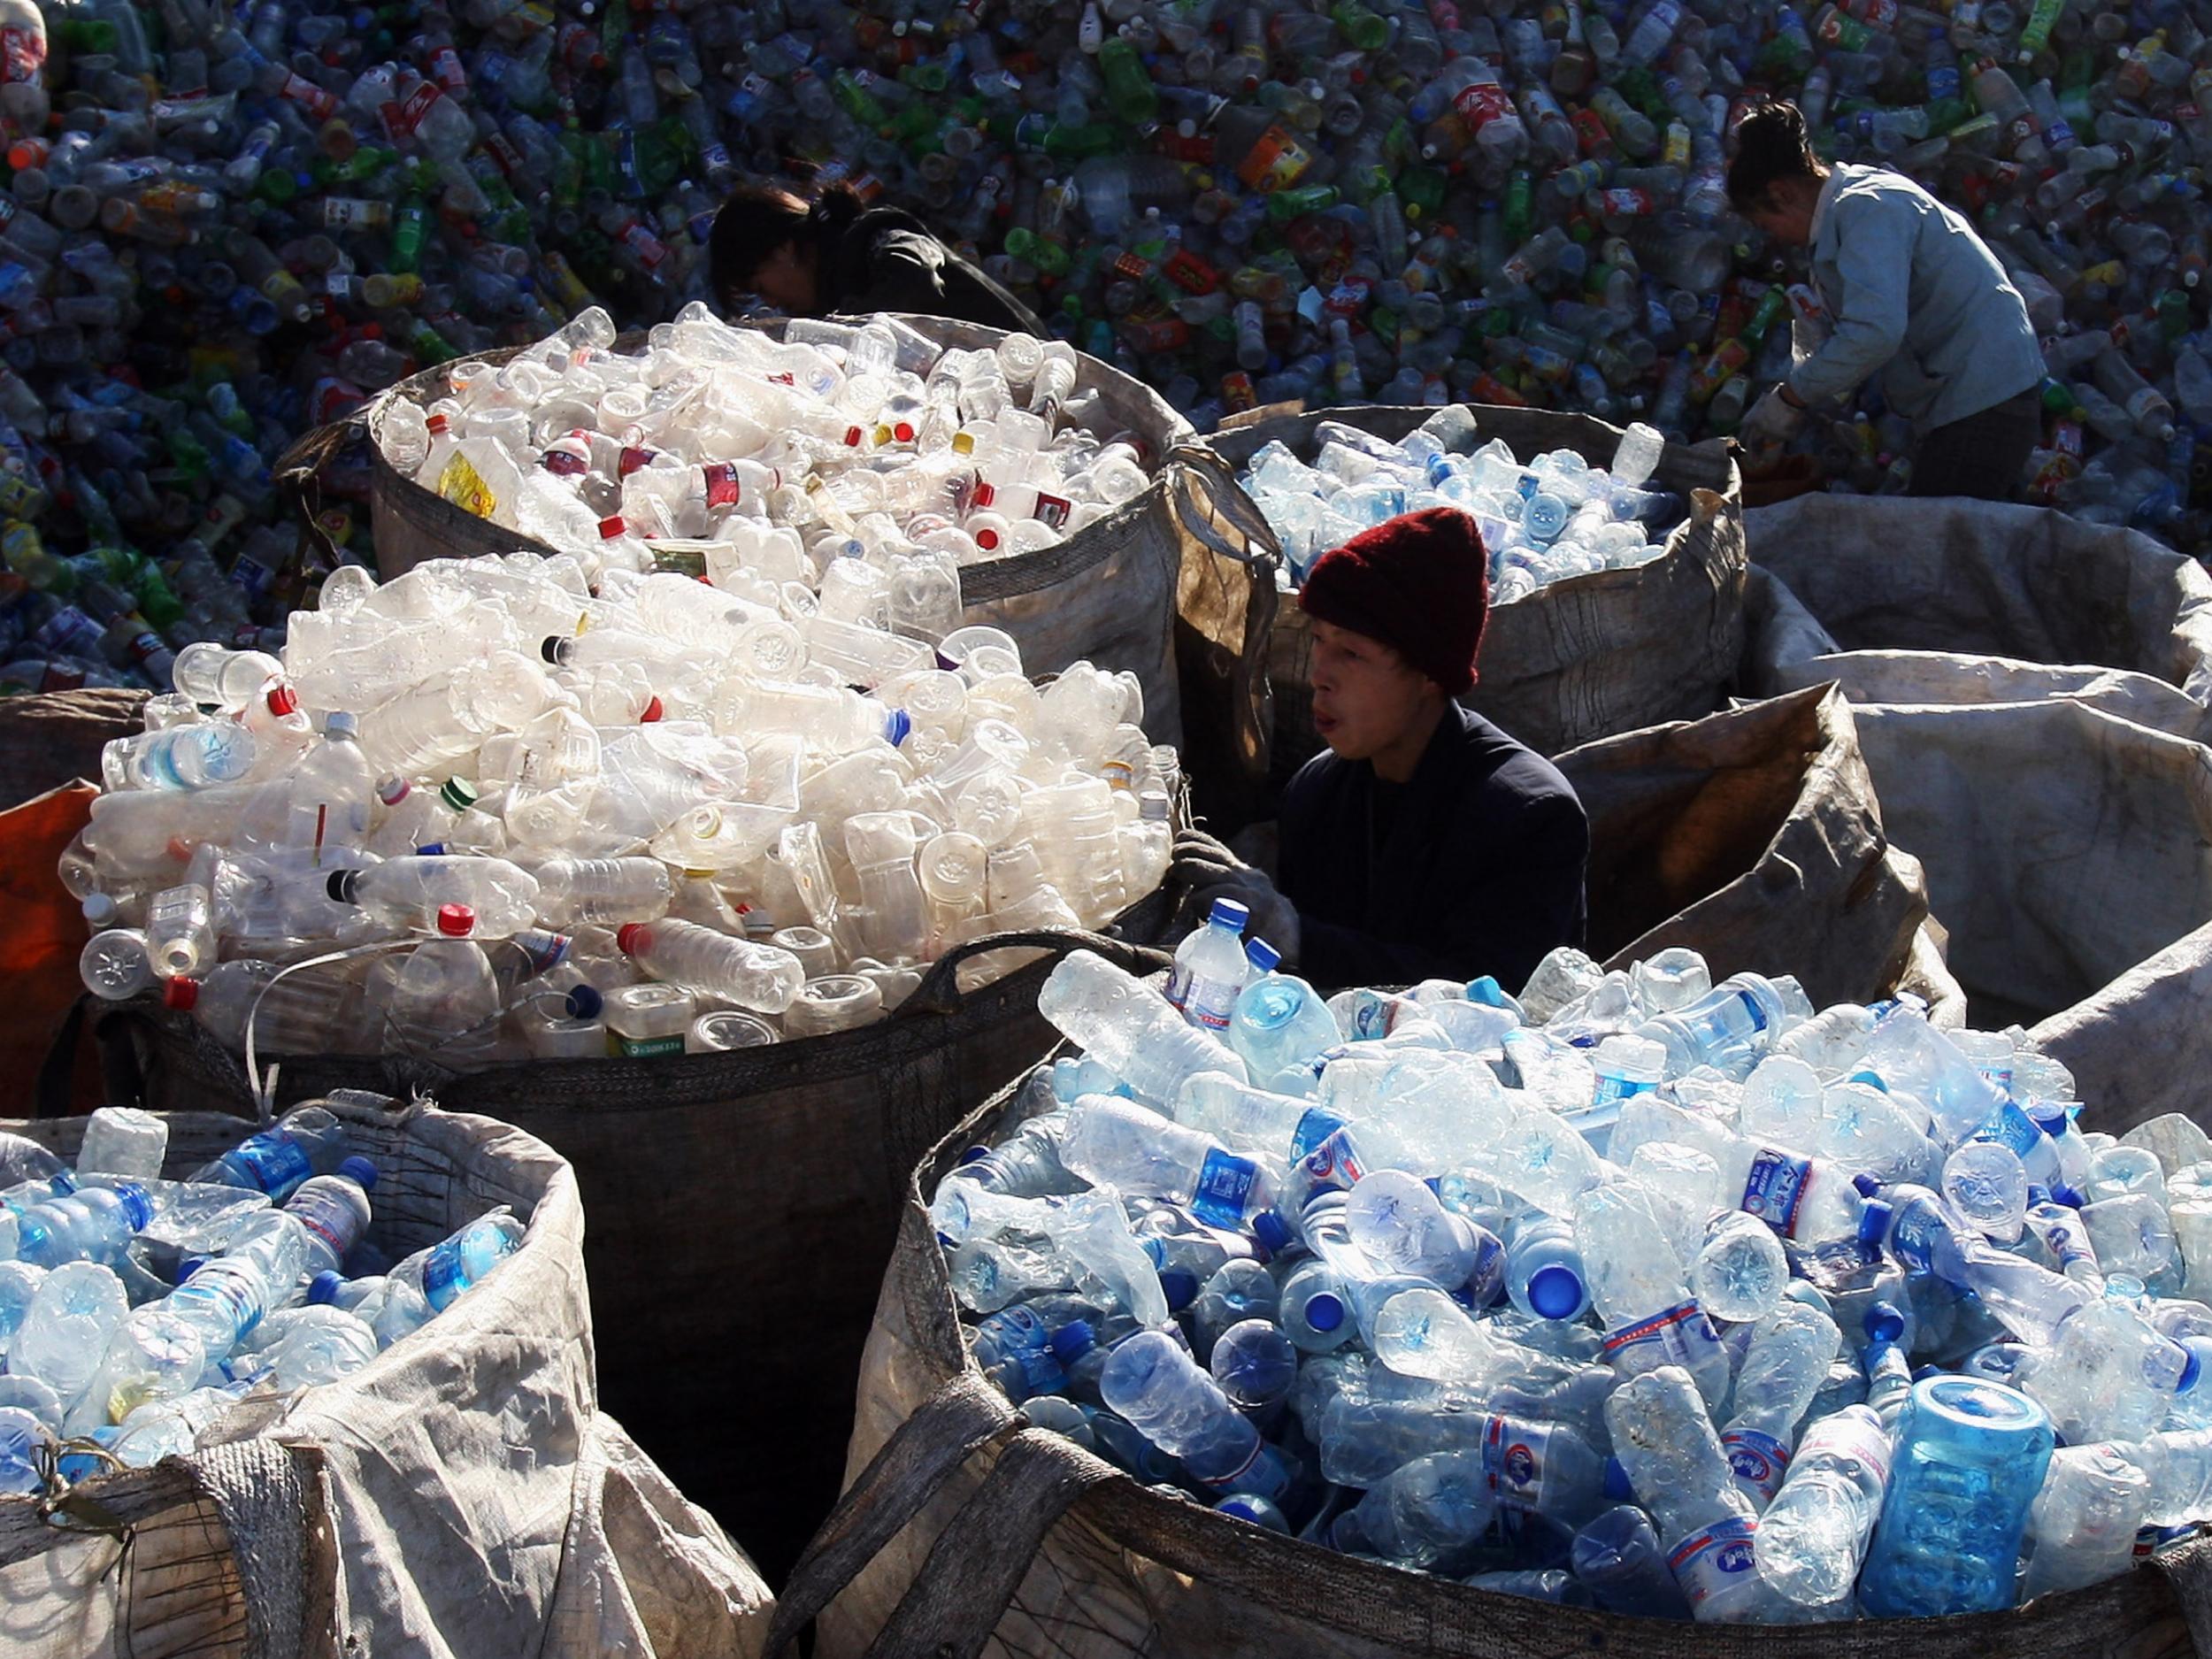 Everything You've Been Told About Plastic Is Wrong – The Answer Isn't Recycling